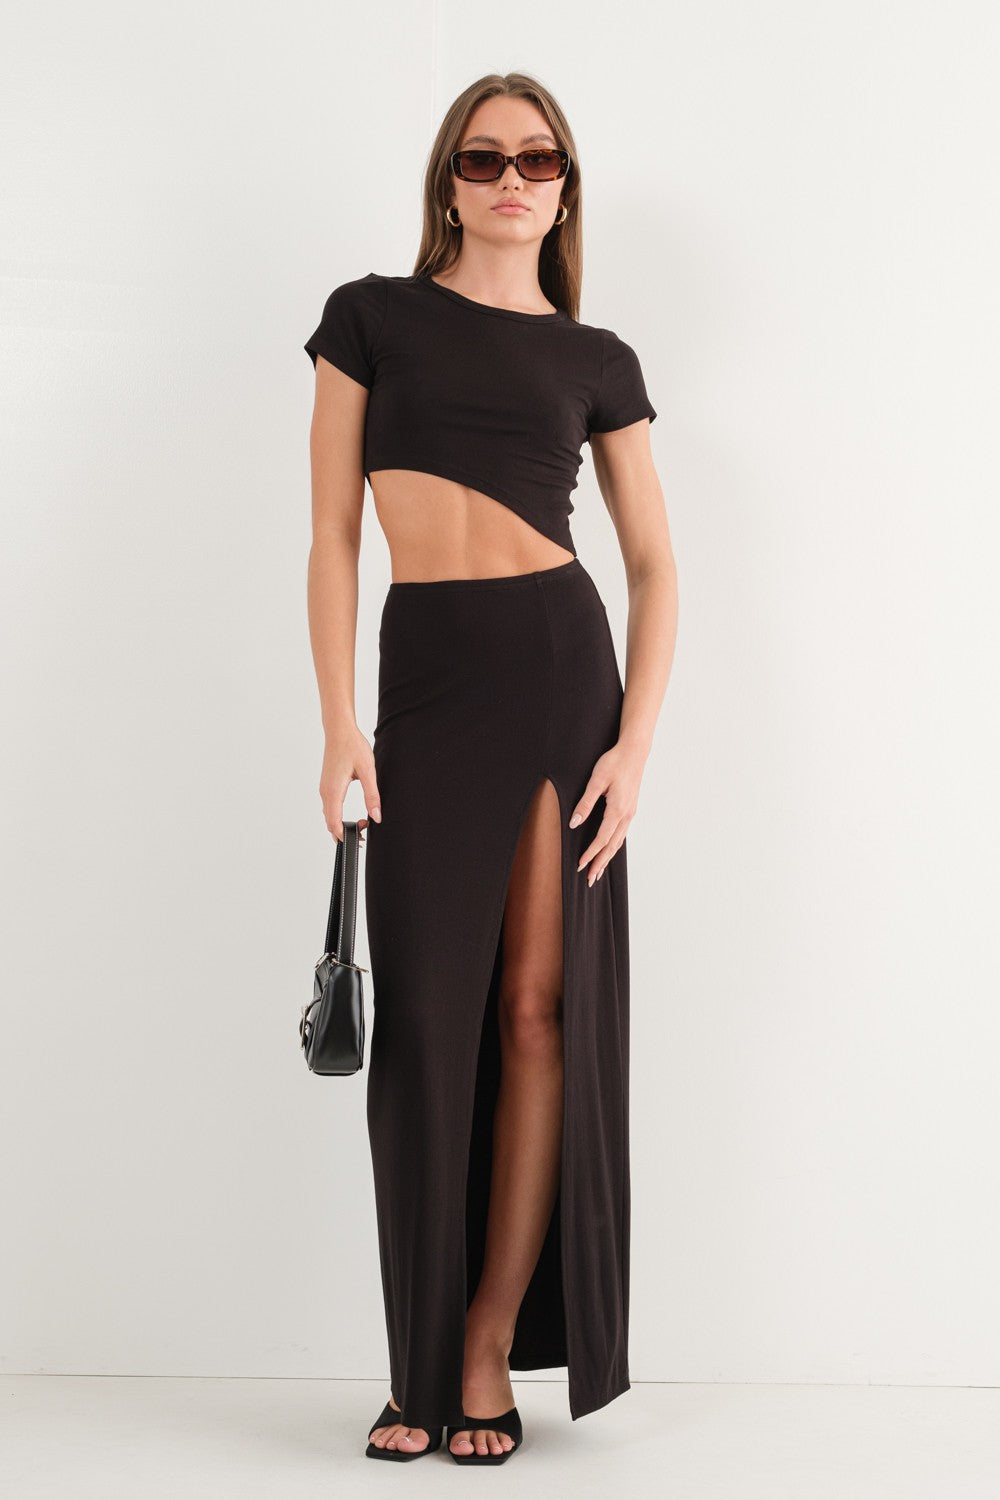 ALMOST FAMOUS MAXI SKIRT